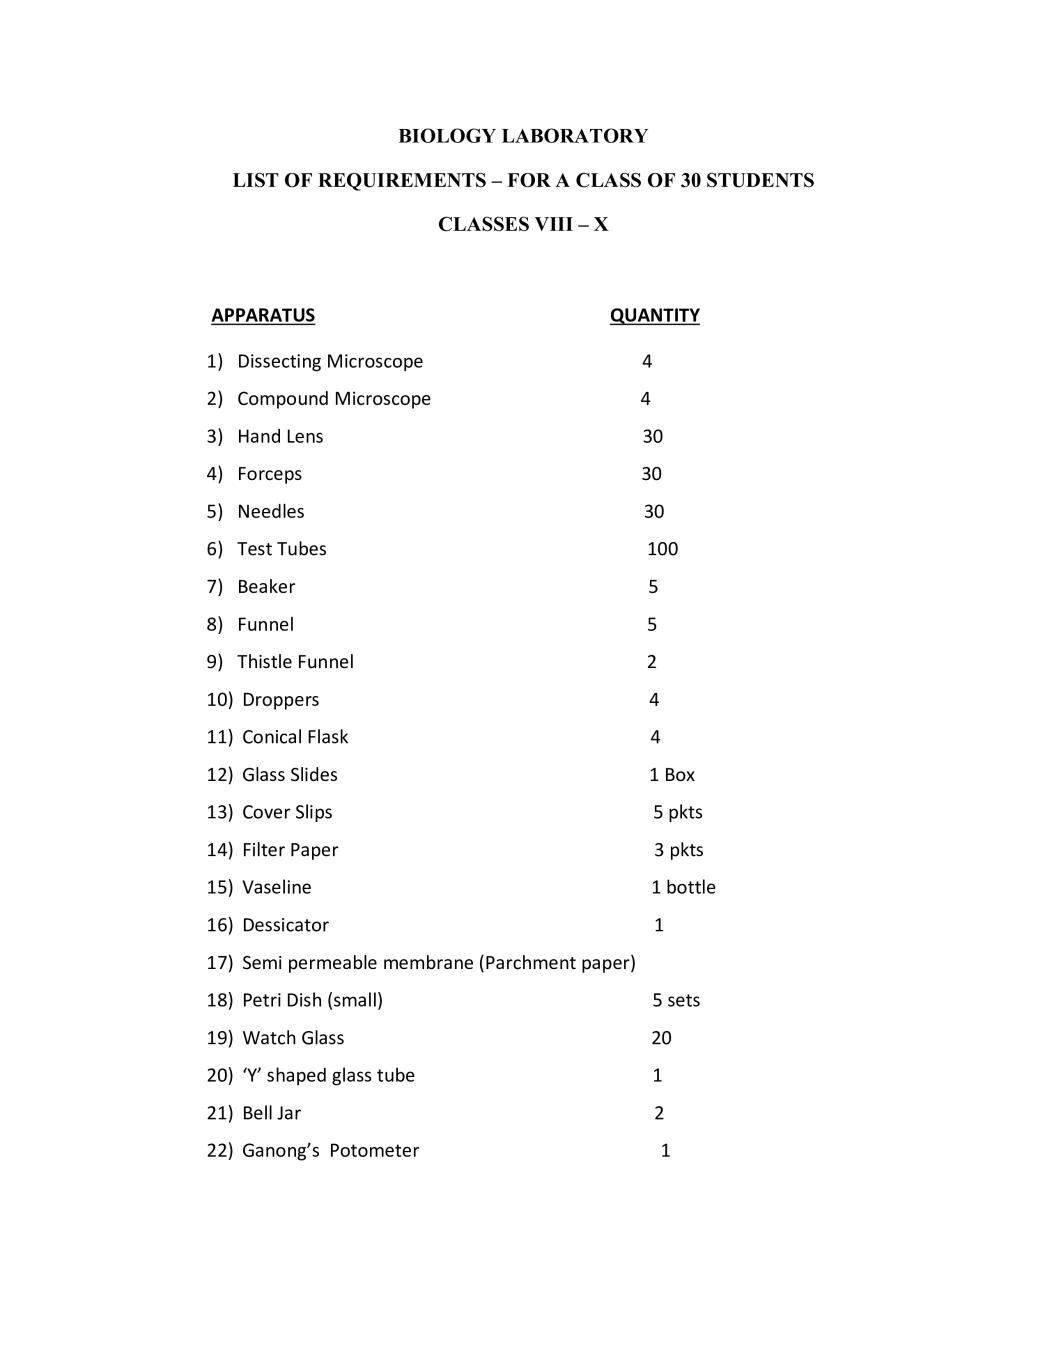 ICSE Biology Lab Manual for Class 8, 9, 10 - Page 1